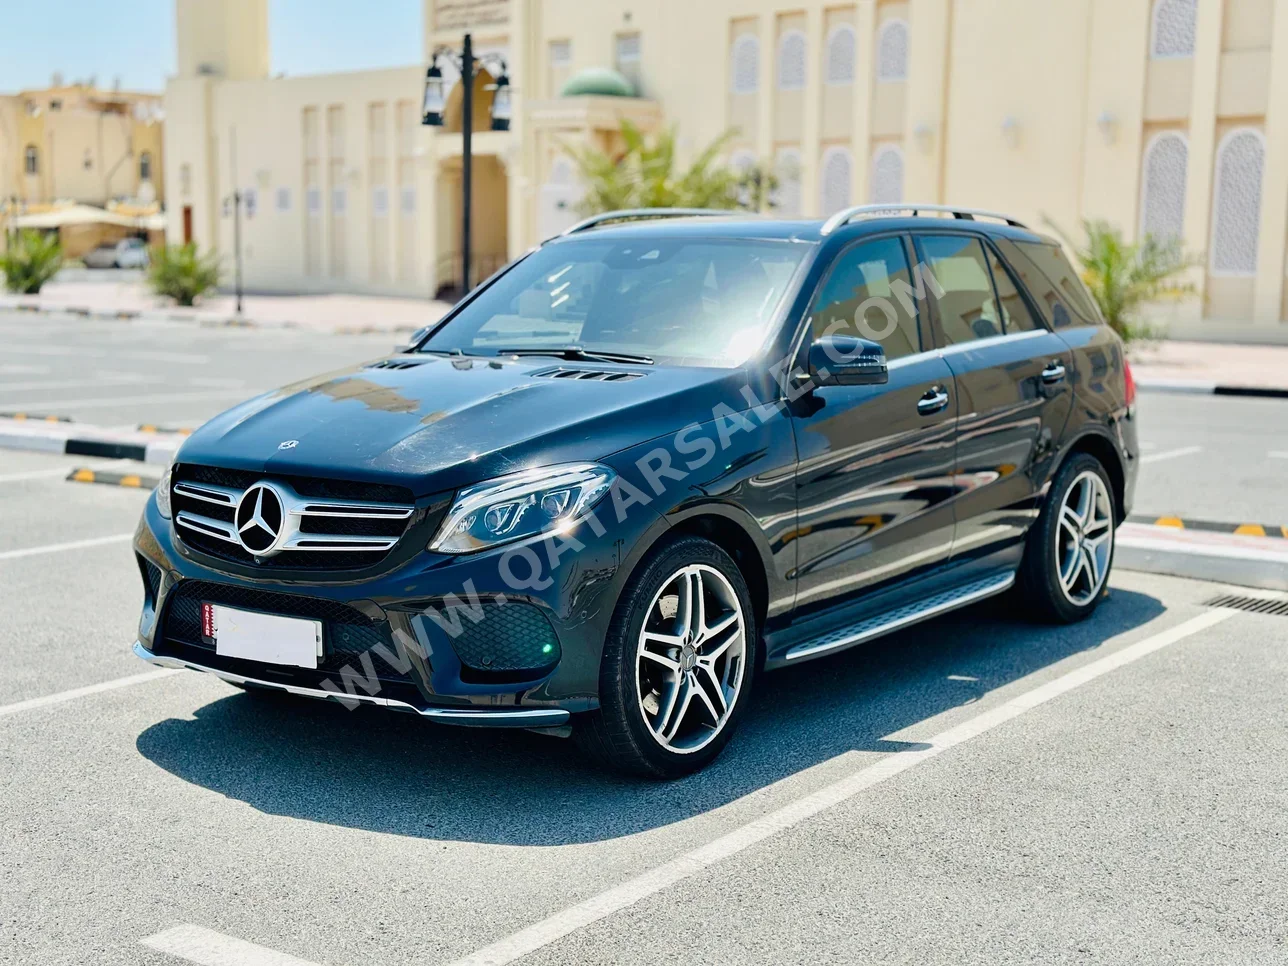 Mercedes-Benz  GLE  400  2018  Automatic  90,000 Km  6 Cylinder  Four Wheel Drive (4WD)  SUV  Black